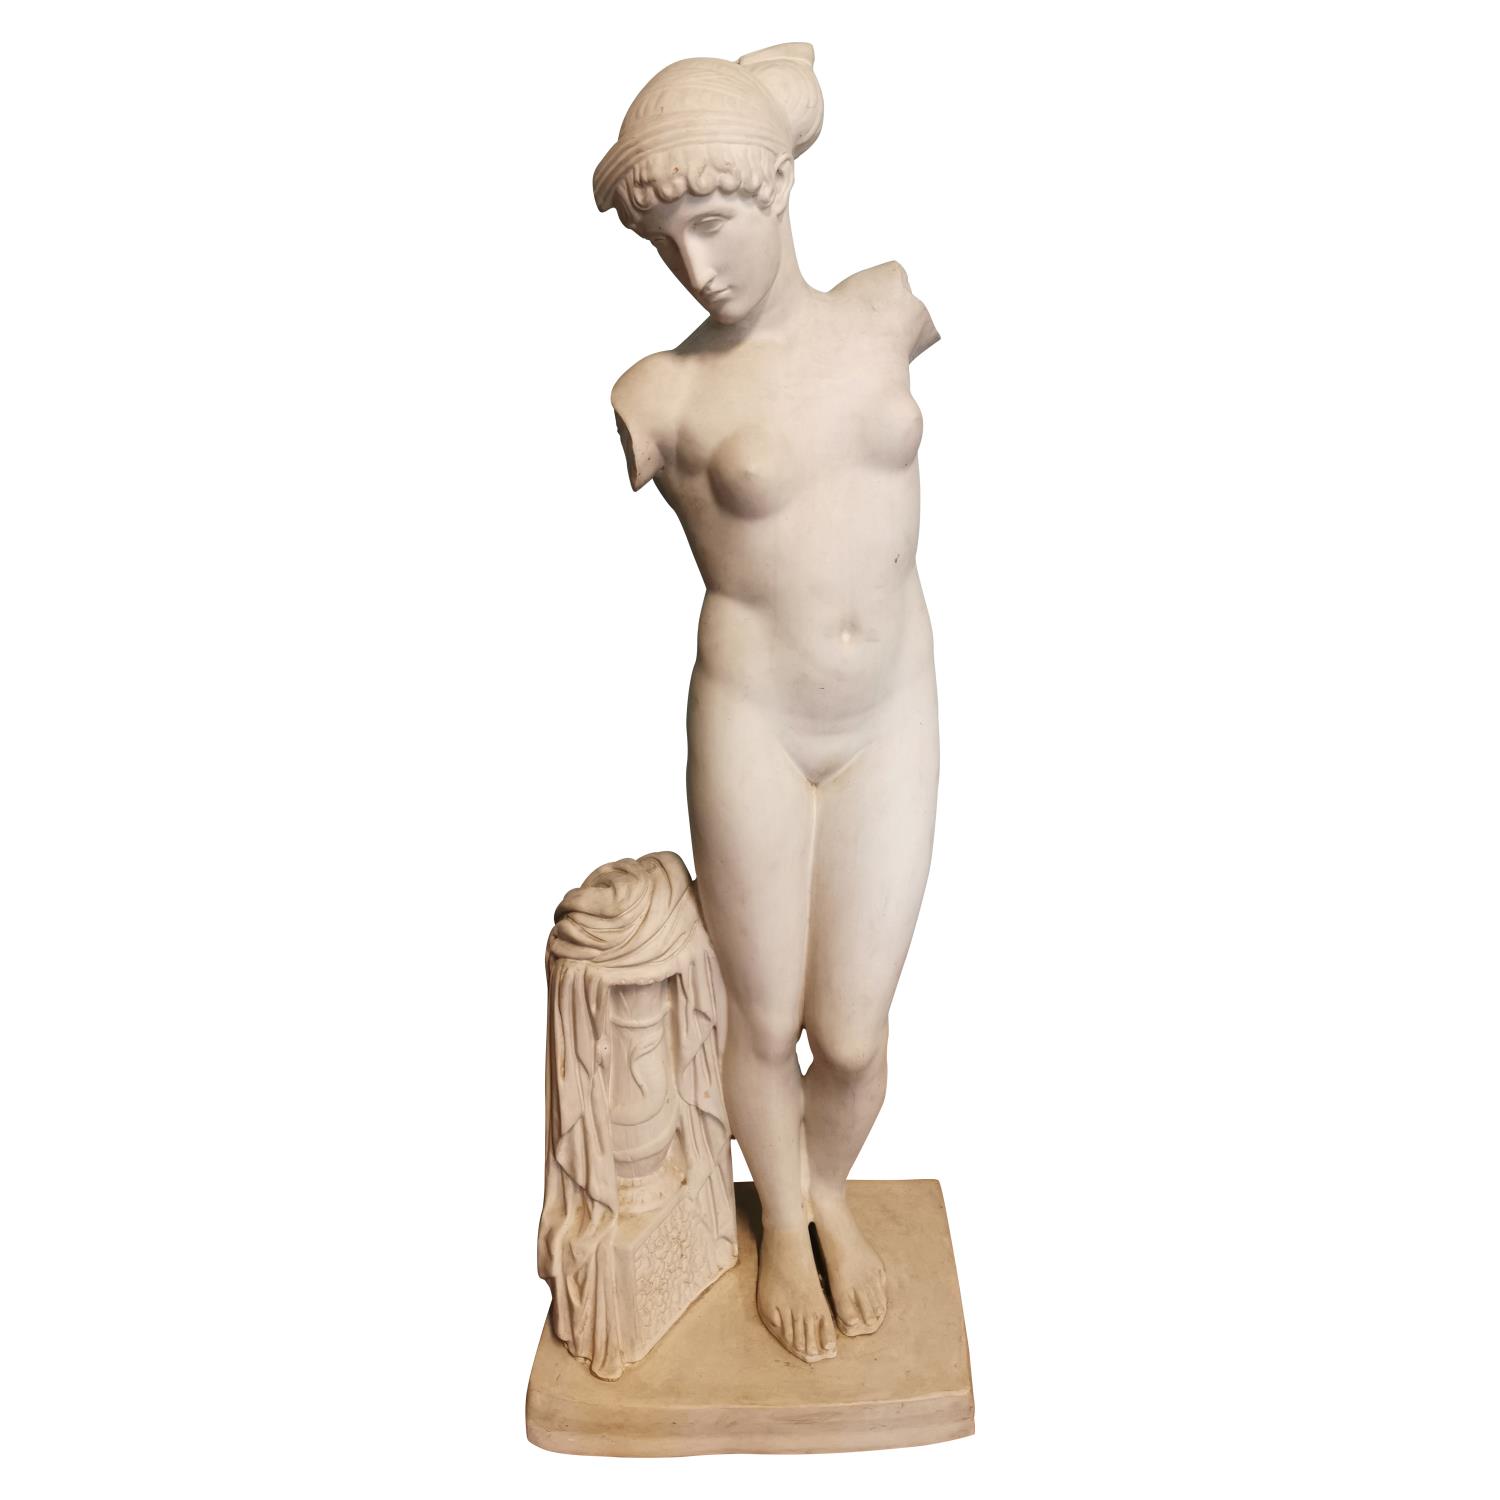 Parian ware figure of a Grecian lady.